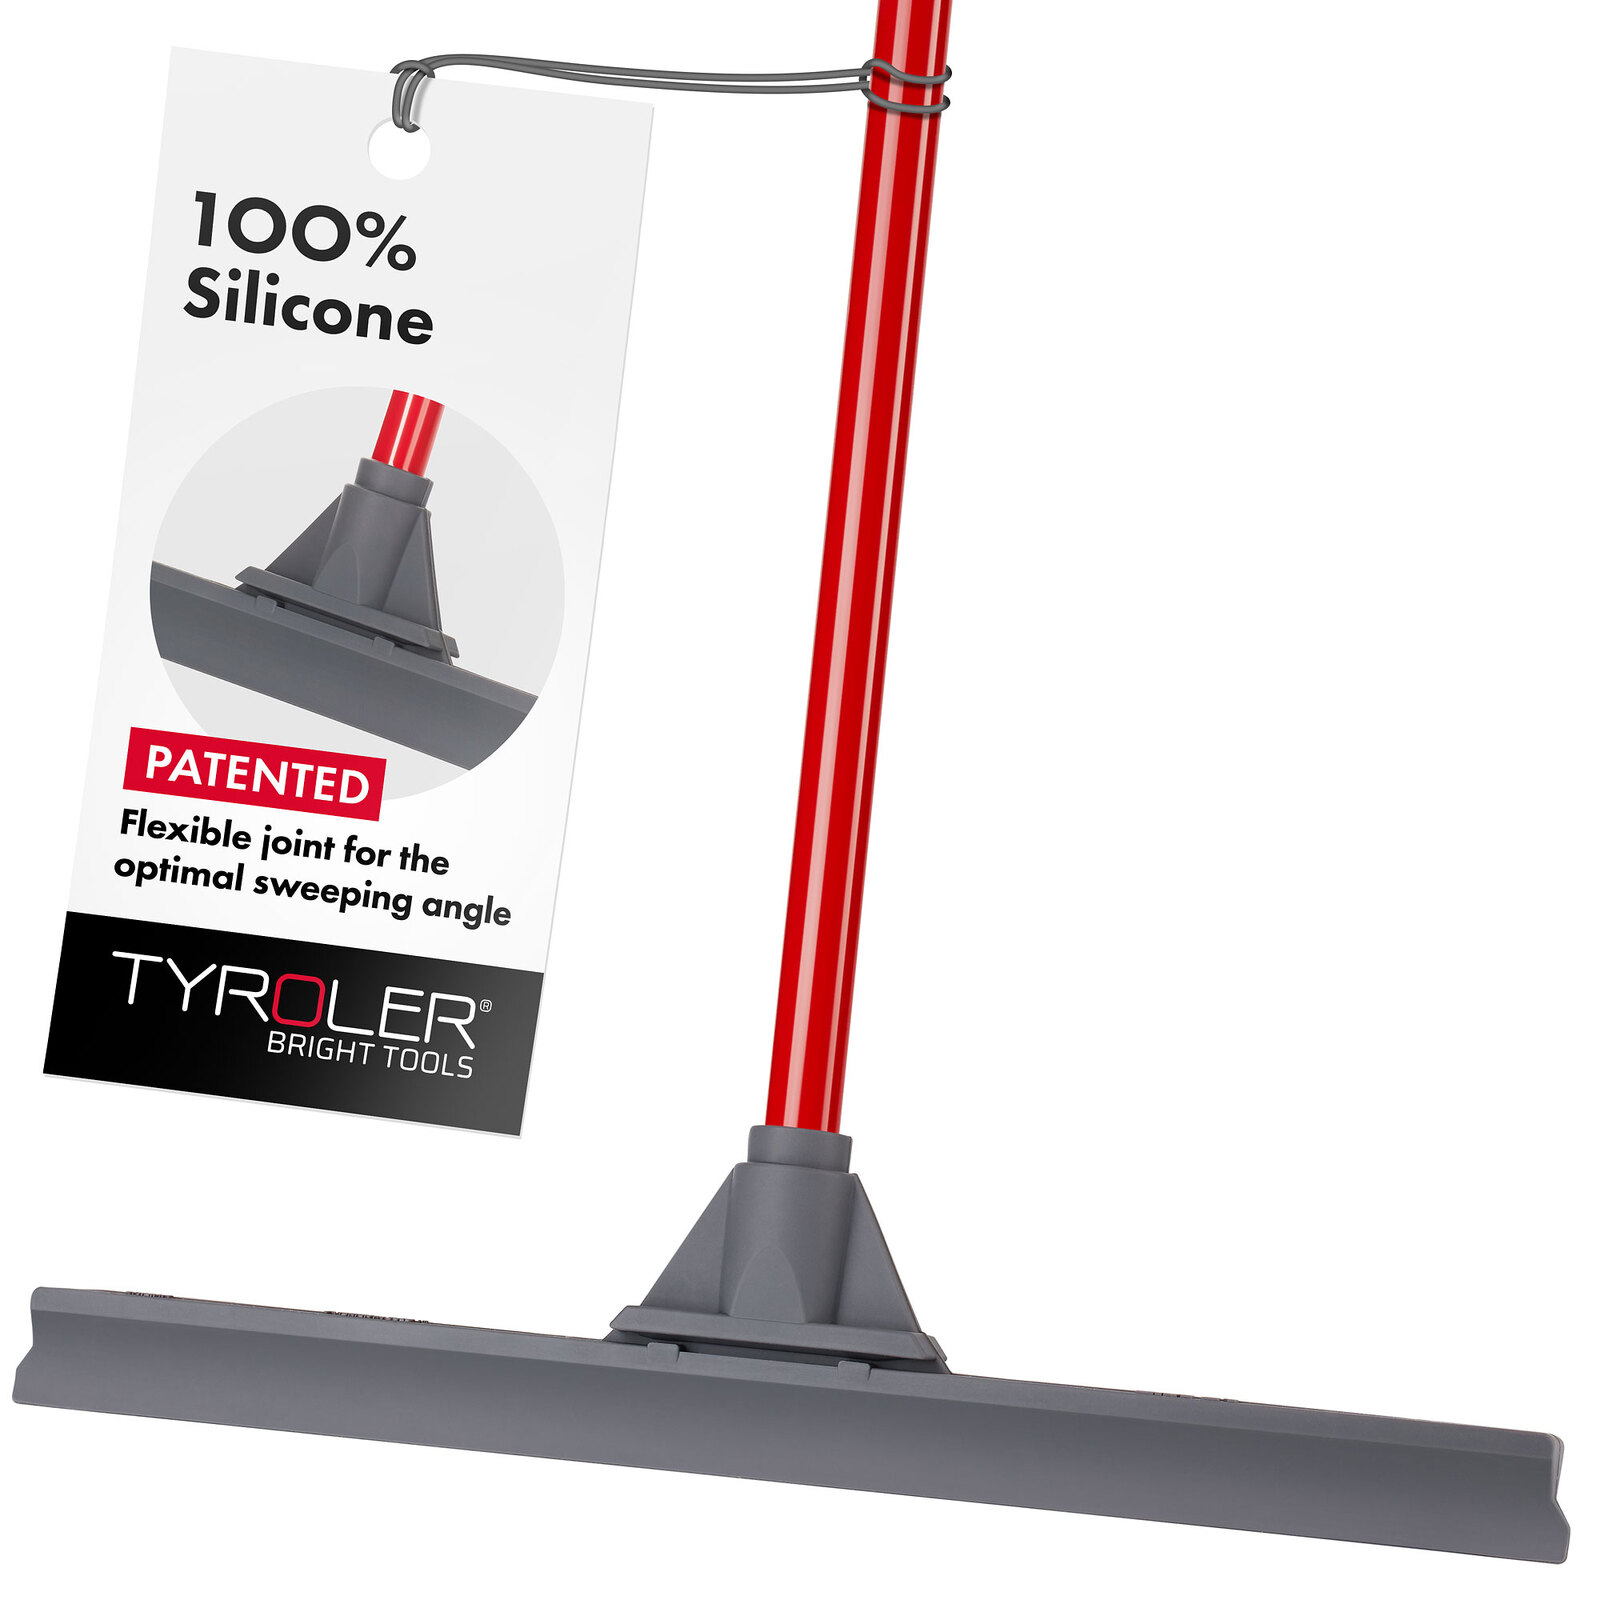 Tyroler BrightTools Silicone Squeegee + FREE 1PK Floor Wipes 2-in